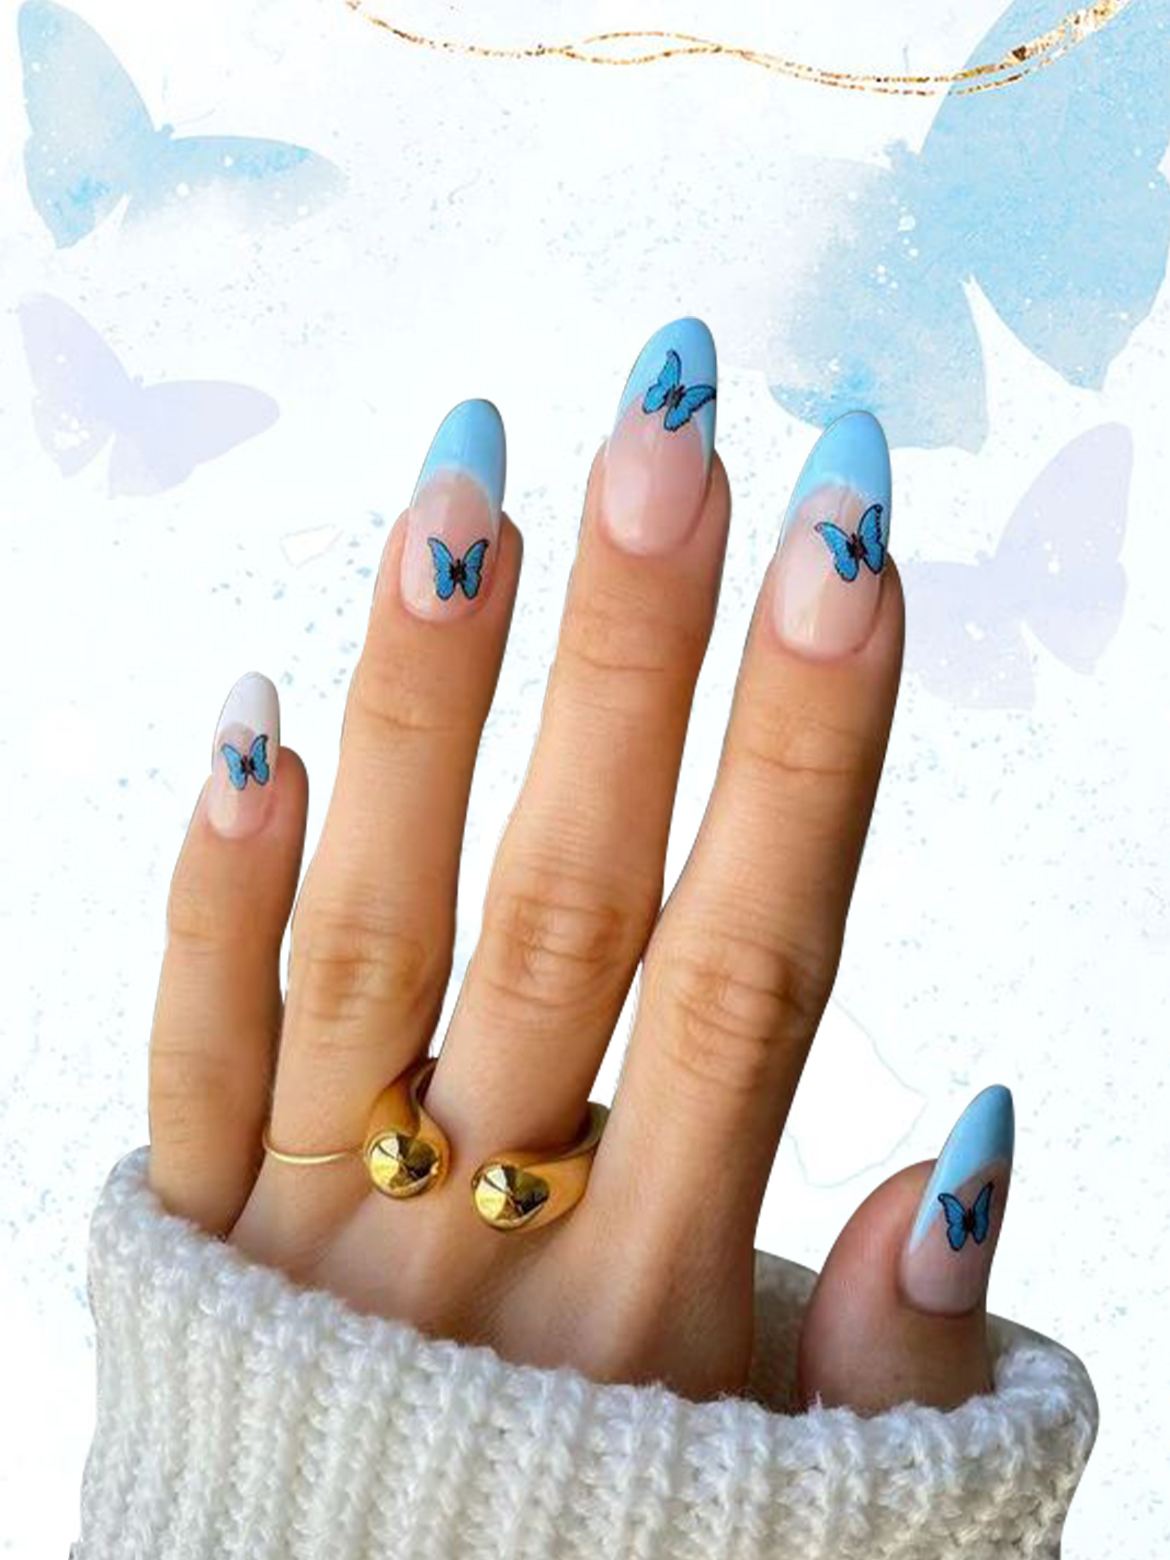 Butterfly Nails Trend - SUGAR Cosmetics